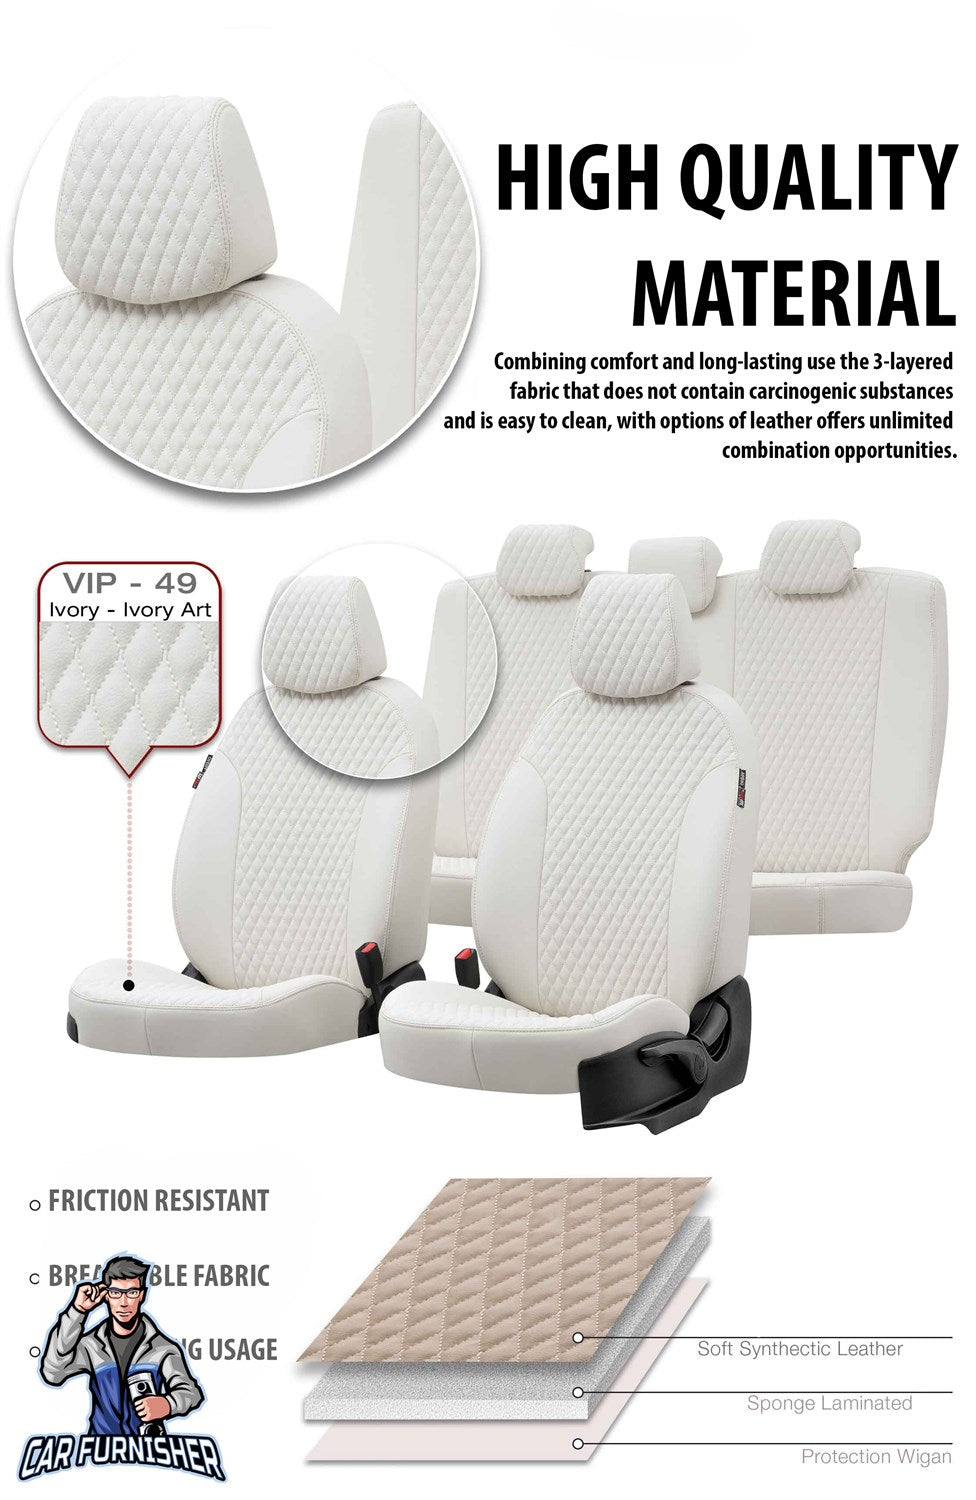 Hyundai Accent Seat Covers Amsterdam Leather Design Beige Leather